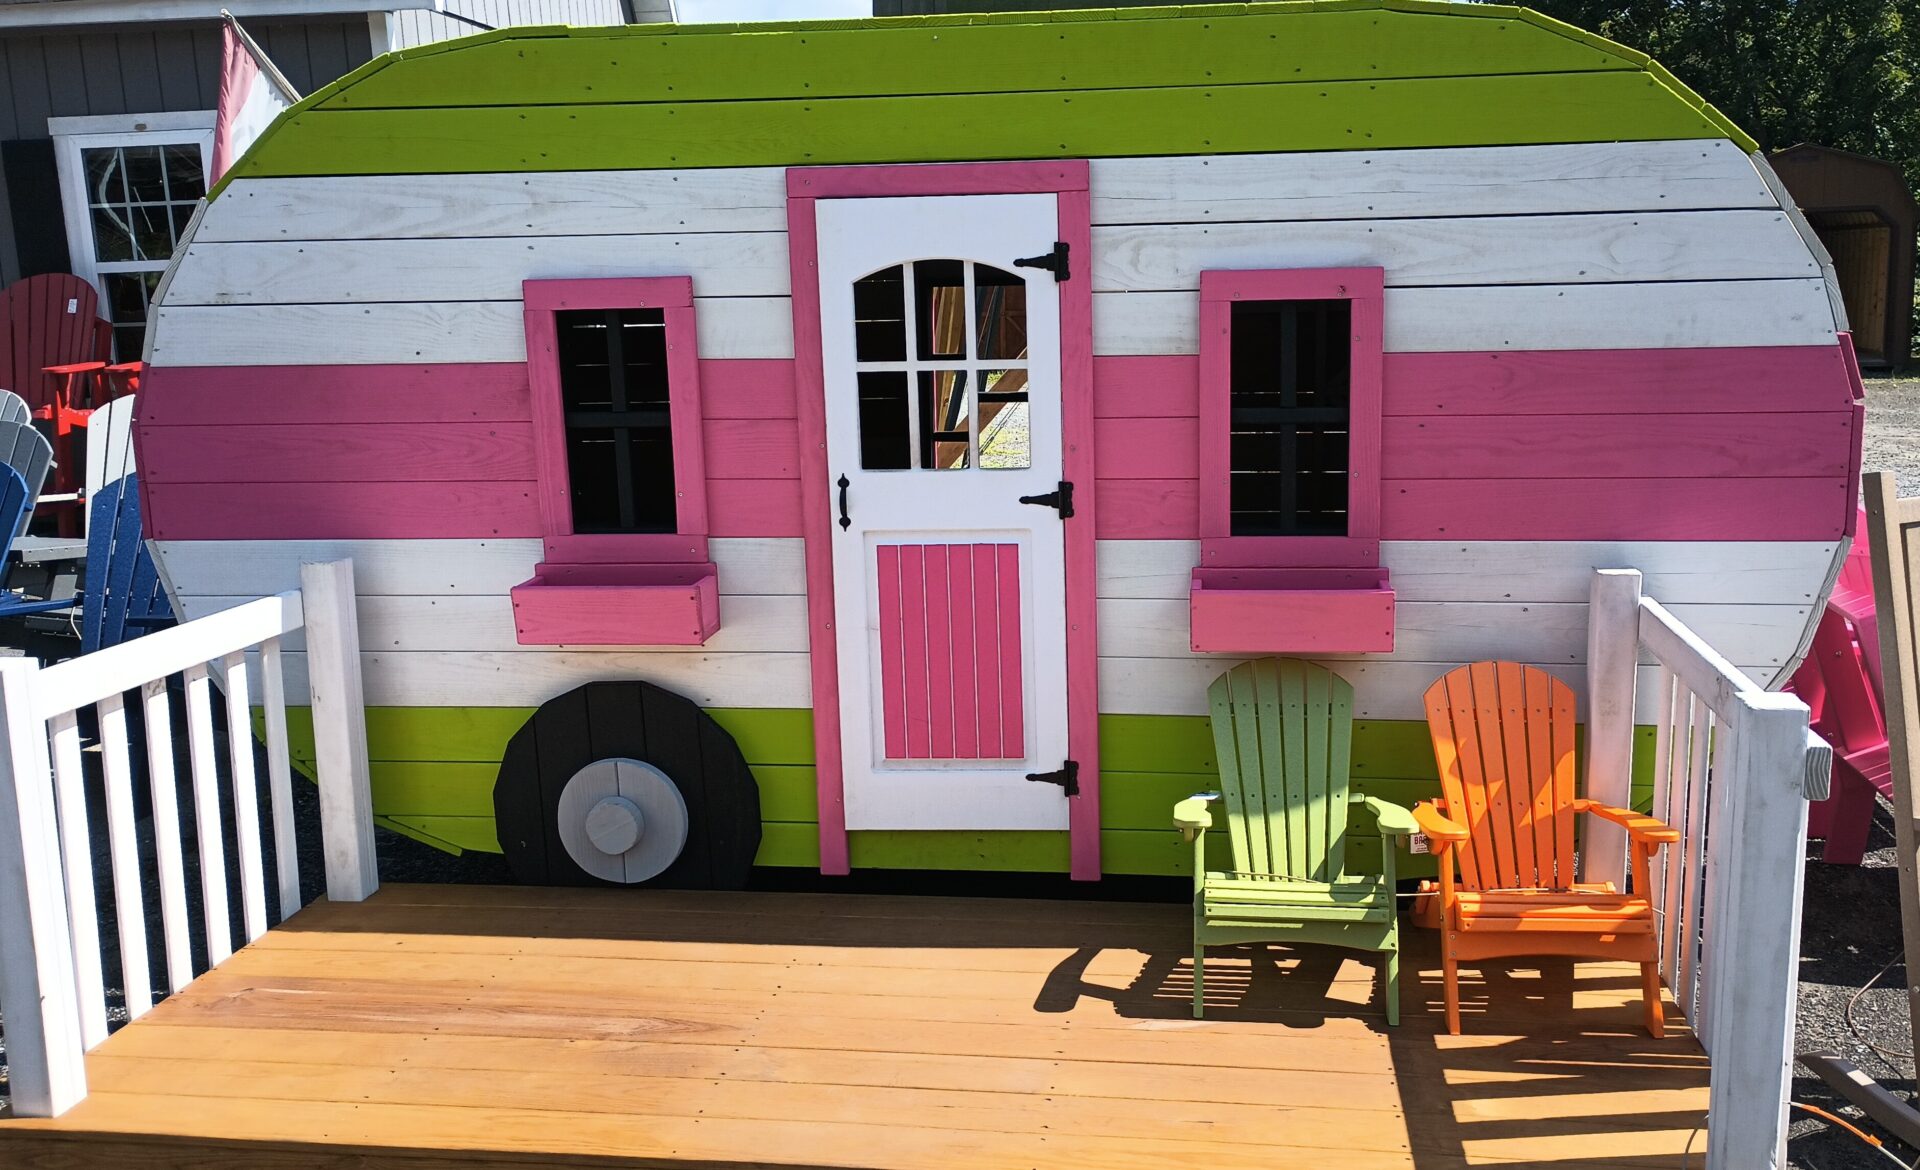 Green, white and pink camper playset with front porch